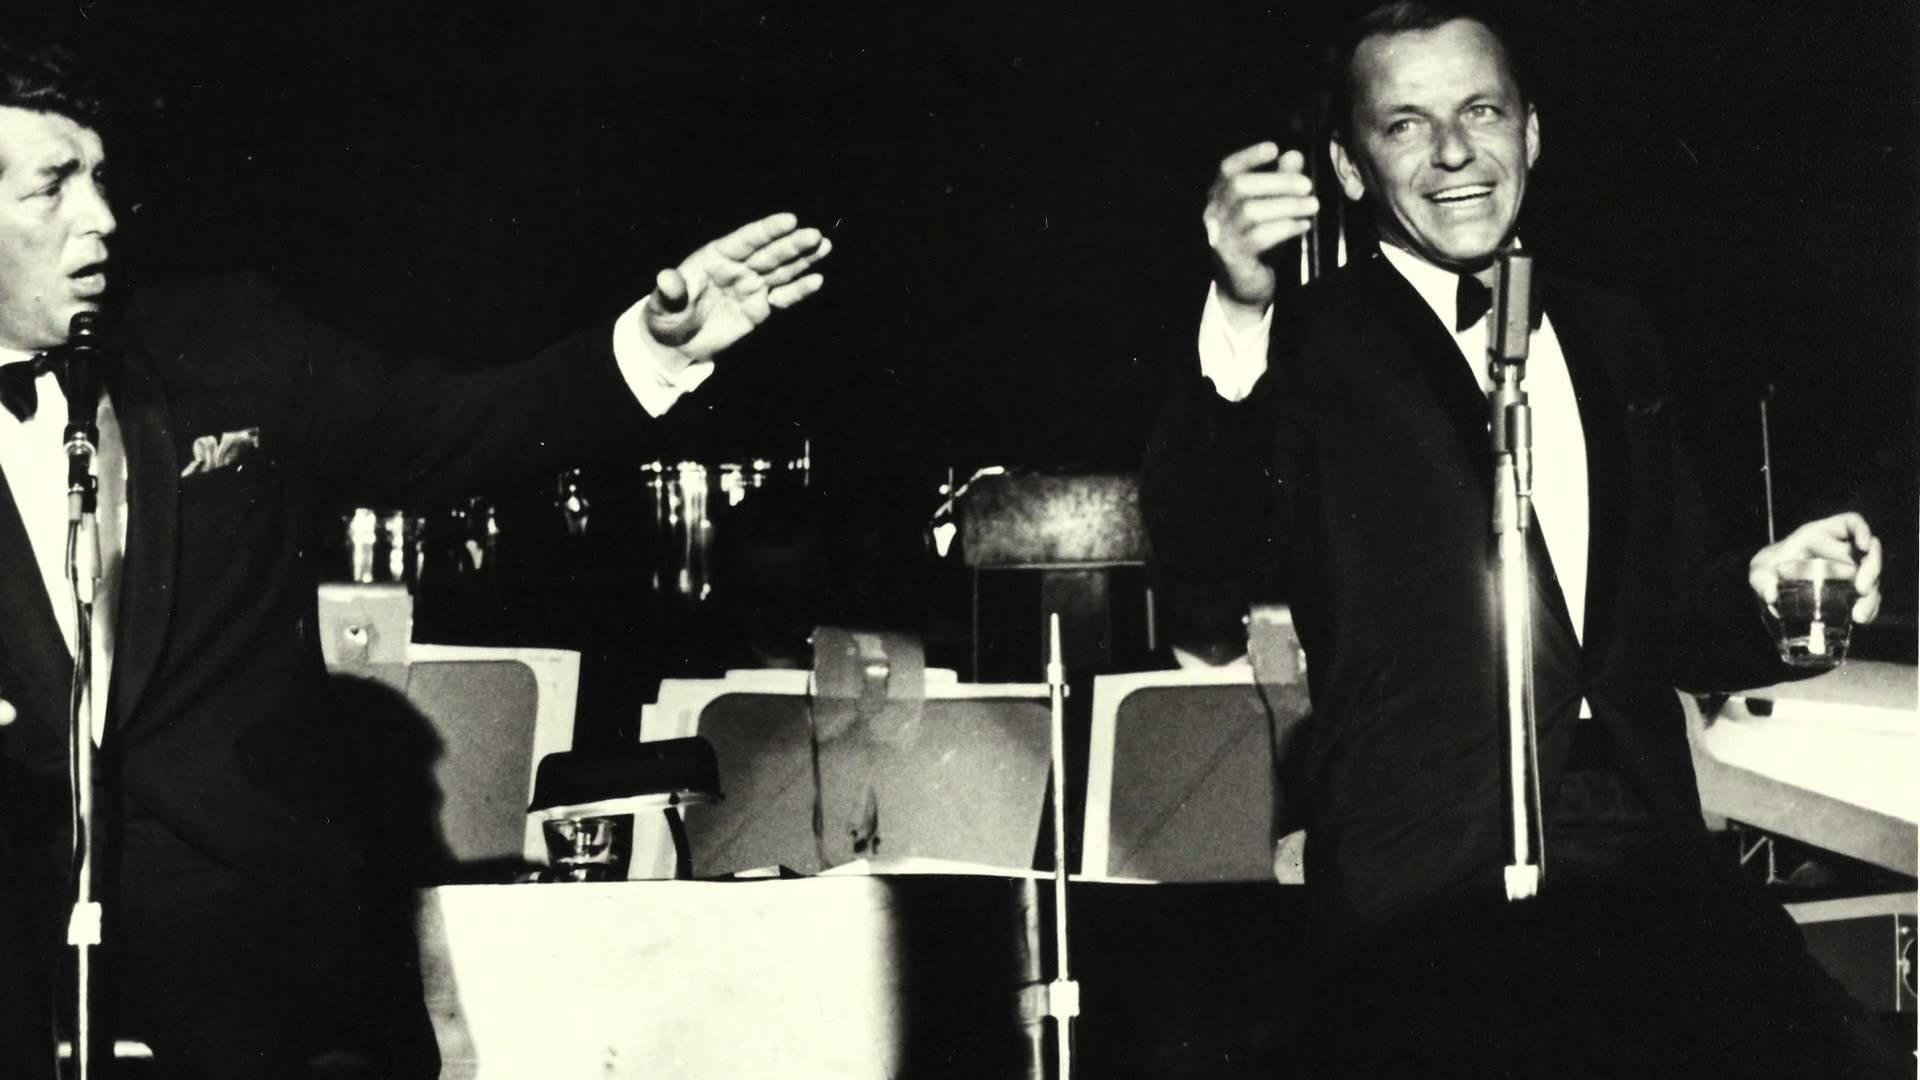 1920x1080 Jack and Frank Together Again; Jack Daniel's(R) to Introduce  Special-Edition Frank Sinatra Whiskey